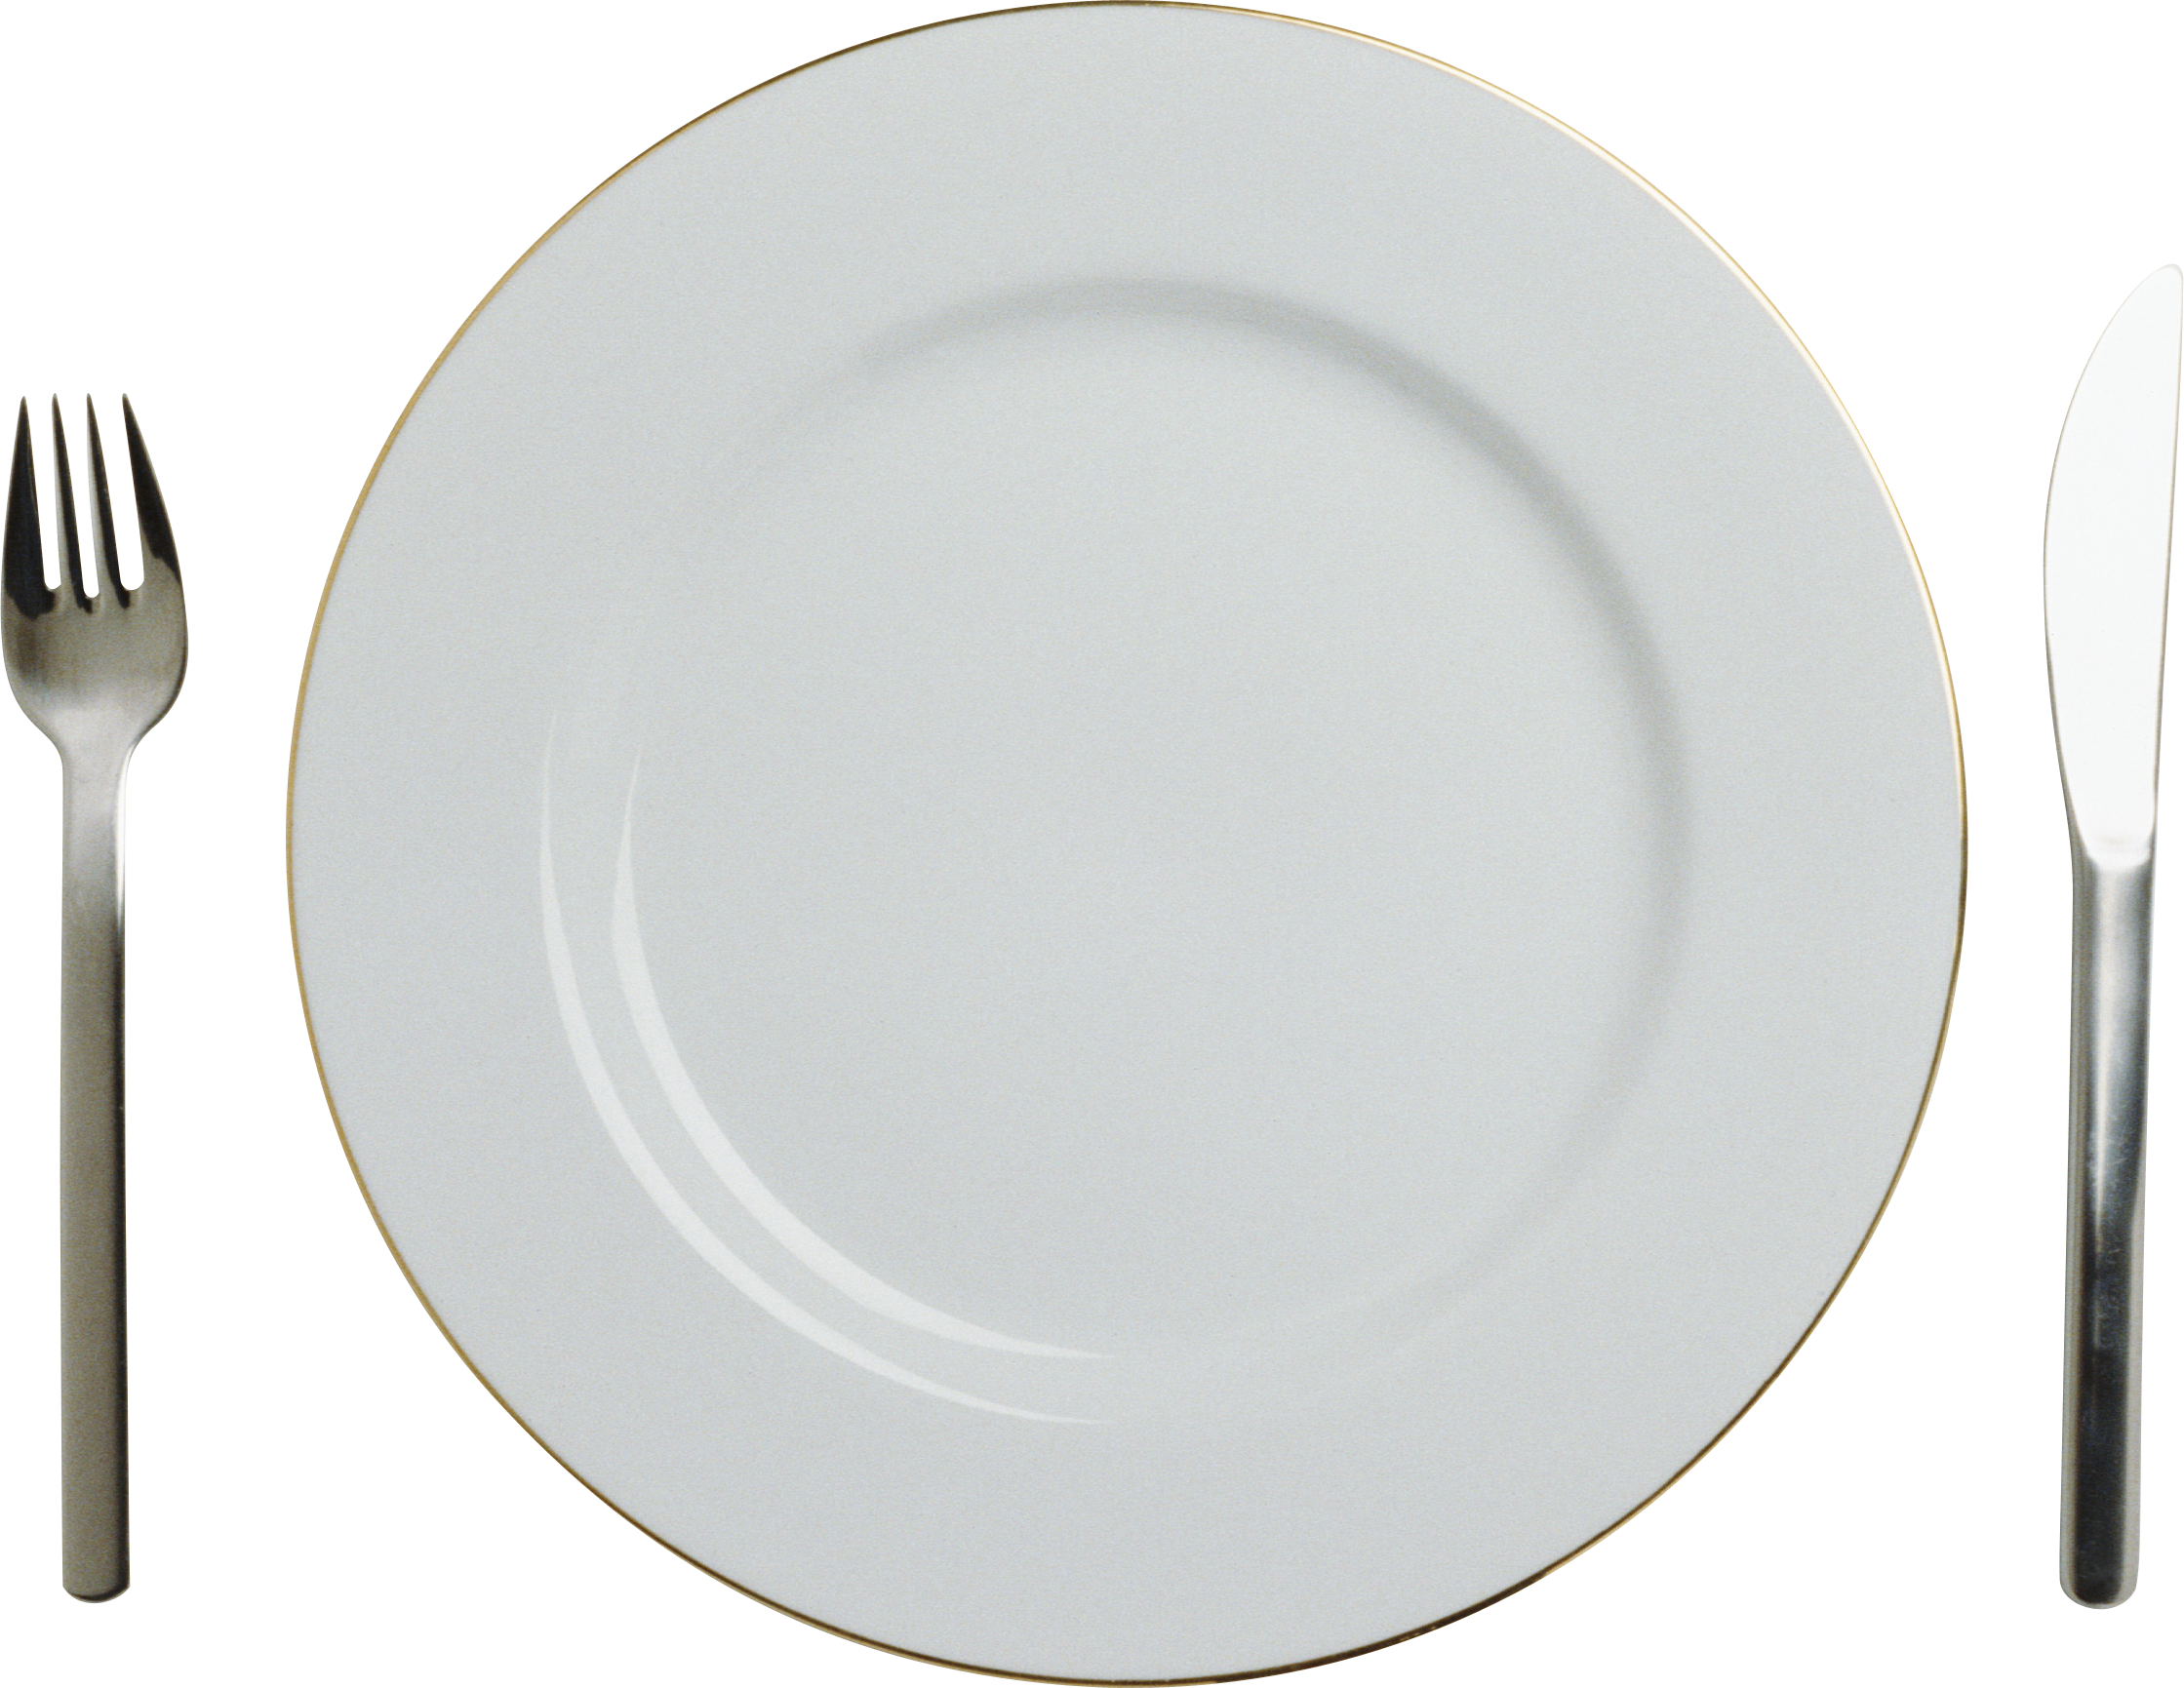 Plate Png Image - Plate, Transparent background PNG HD thumbnail